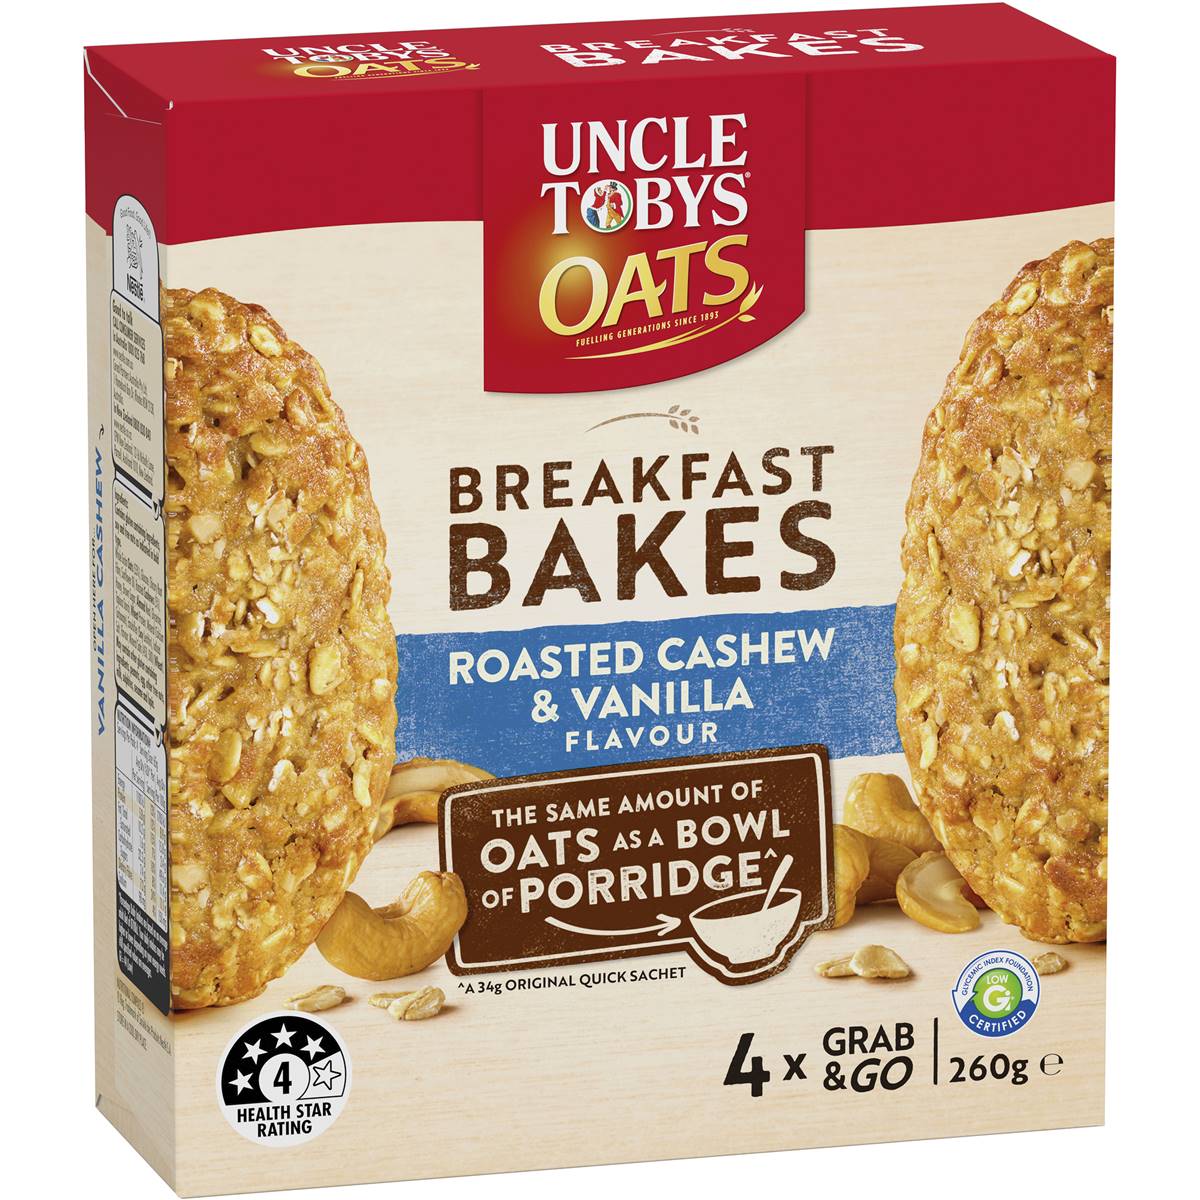 Calories in Uncle Tobys Oats Breakfast Bakes Cereal Bar Roasted Cashew & Vanilla